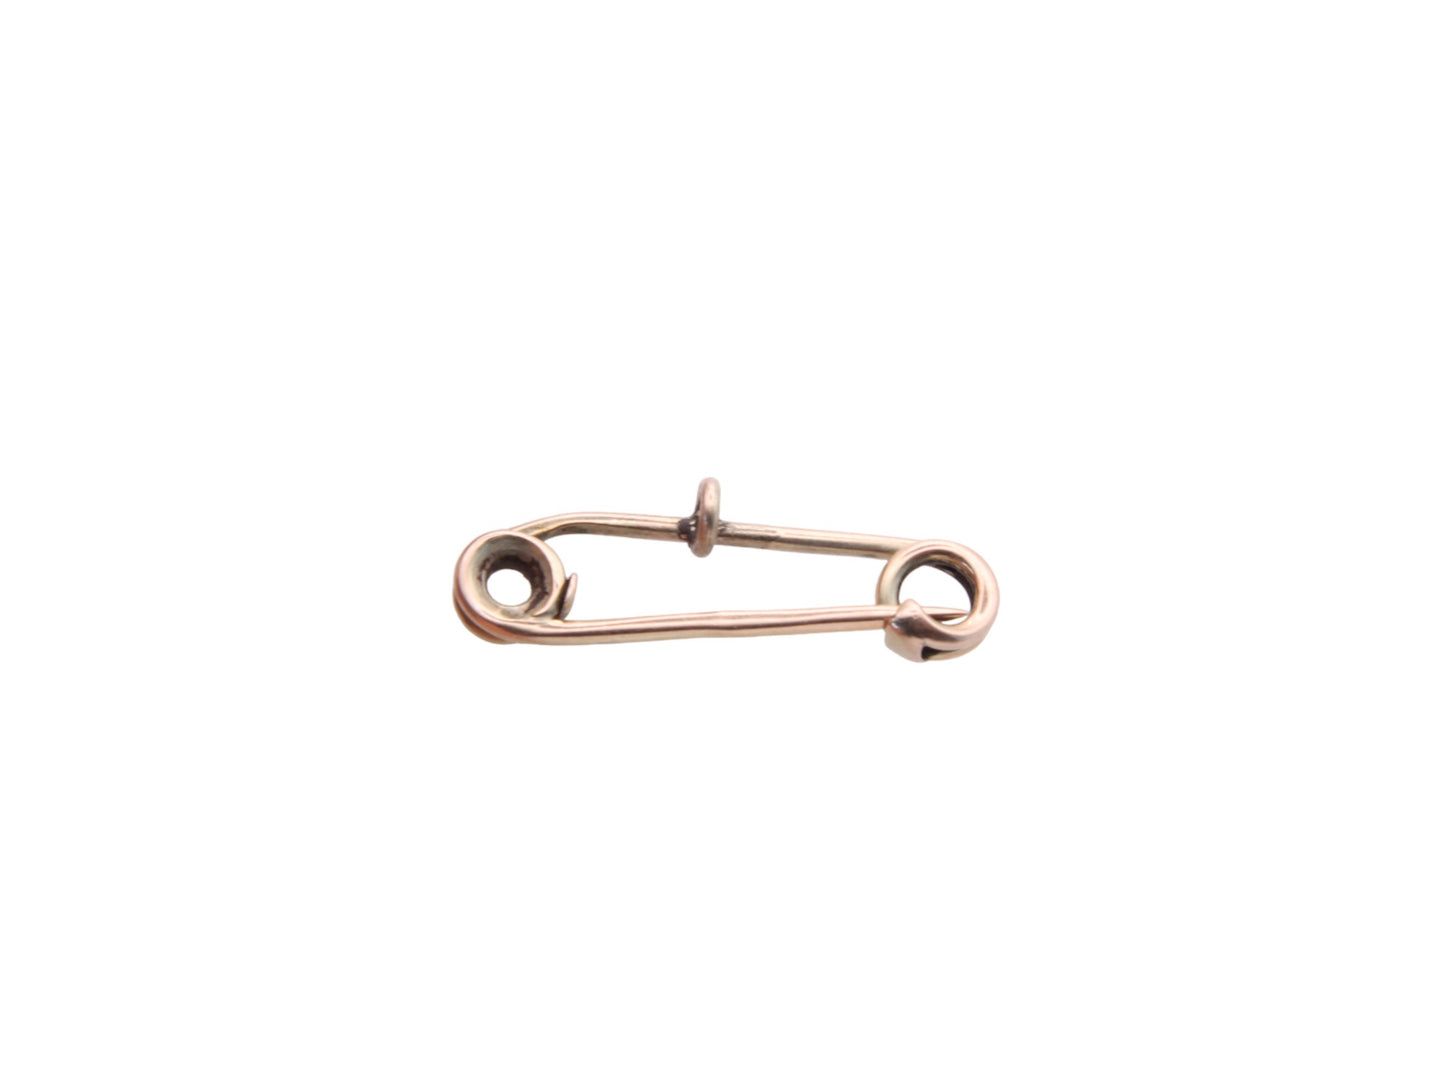 Antique 9ct Gold Safety Pin